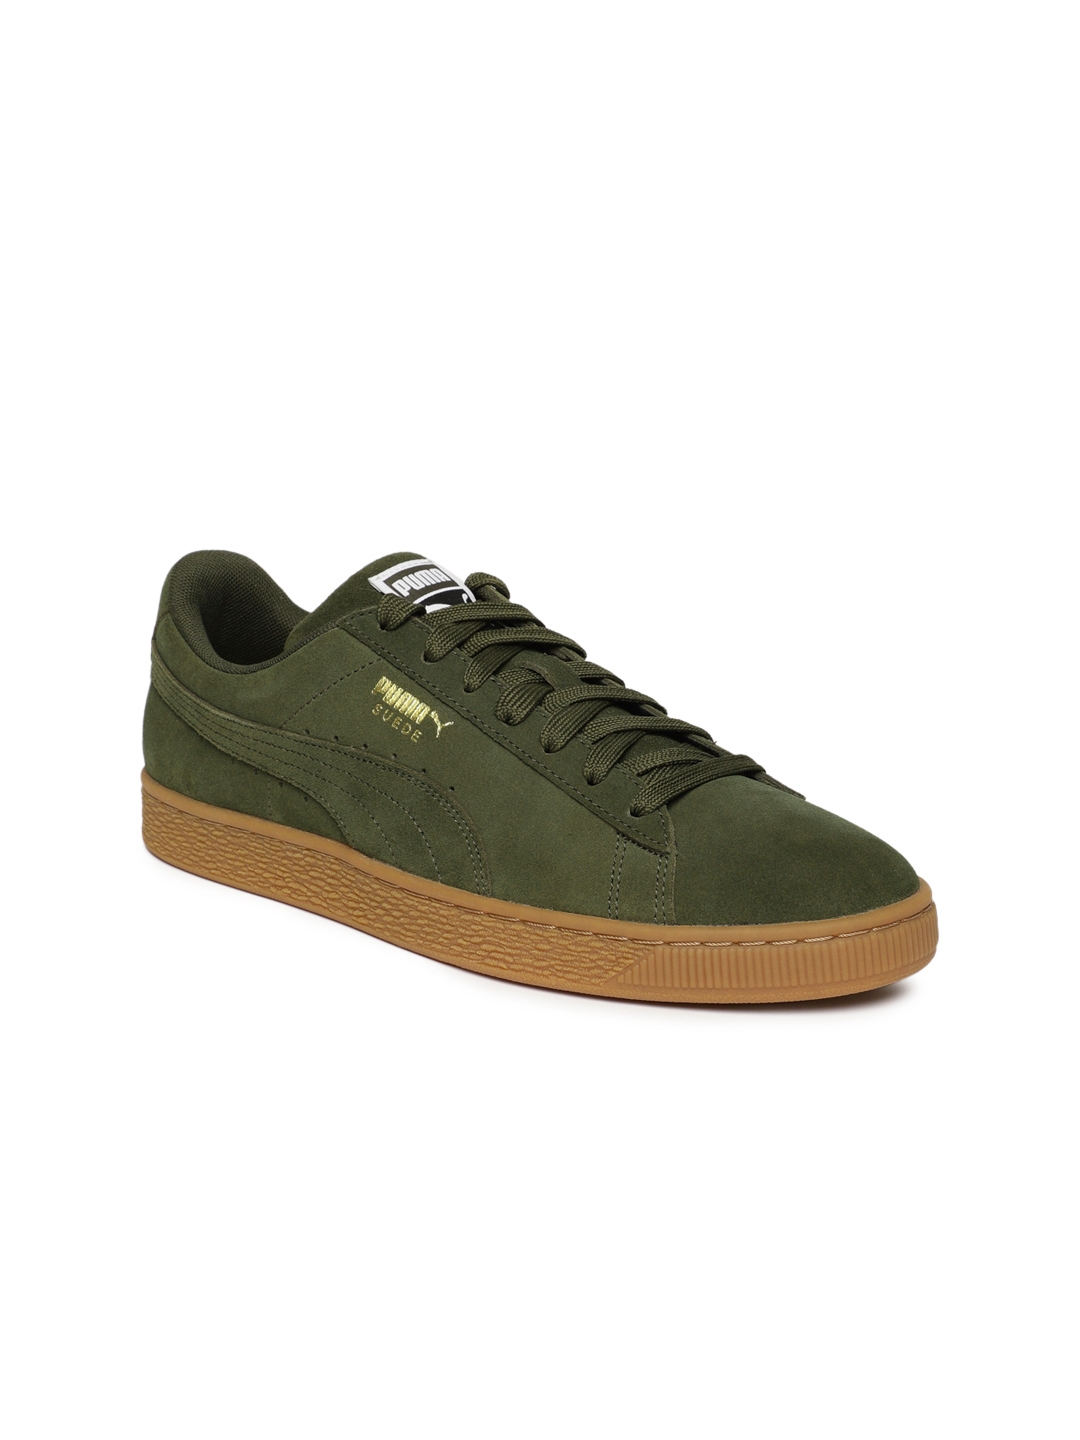 Buy Puma Men Olive Green Suede Classic Sneakers - Casual Shoes for Unisex  7252606 | Myntra